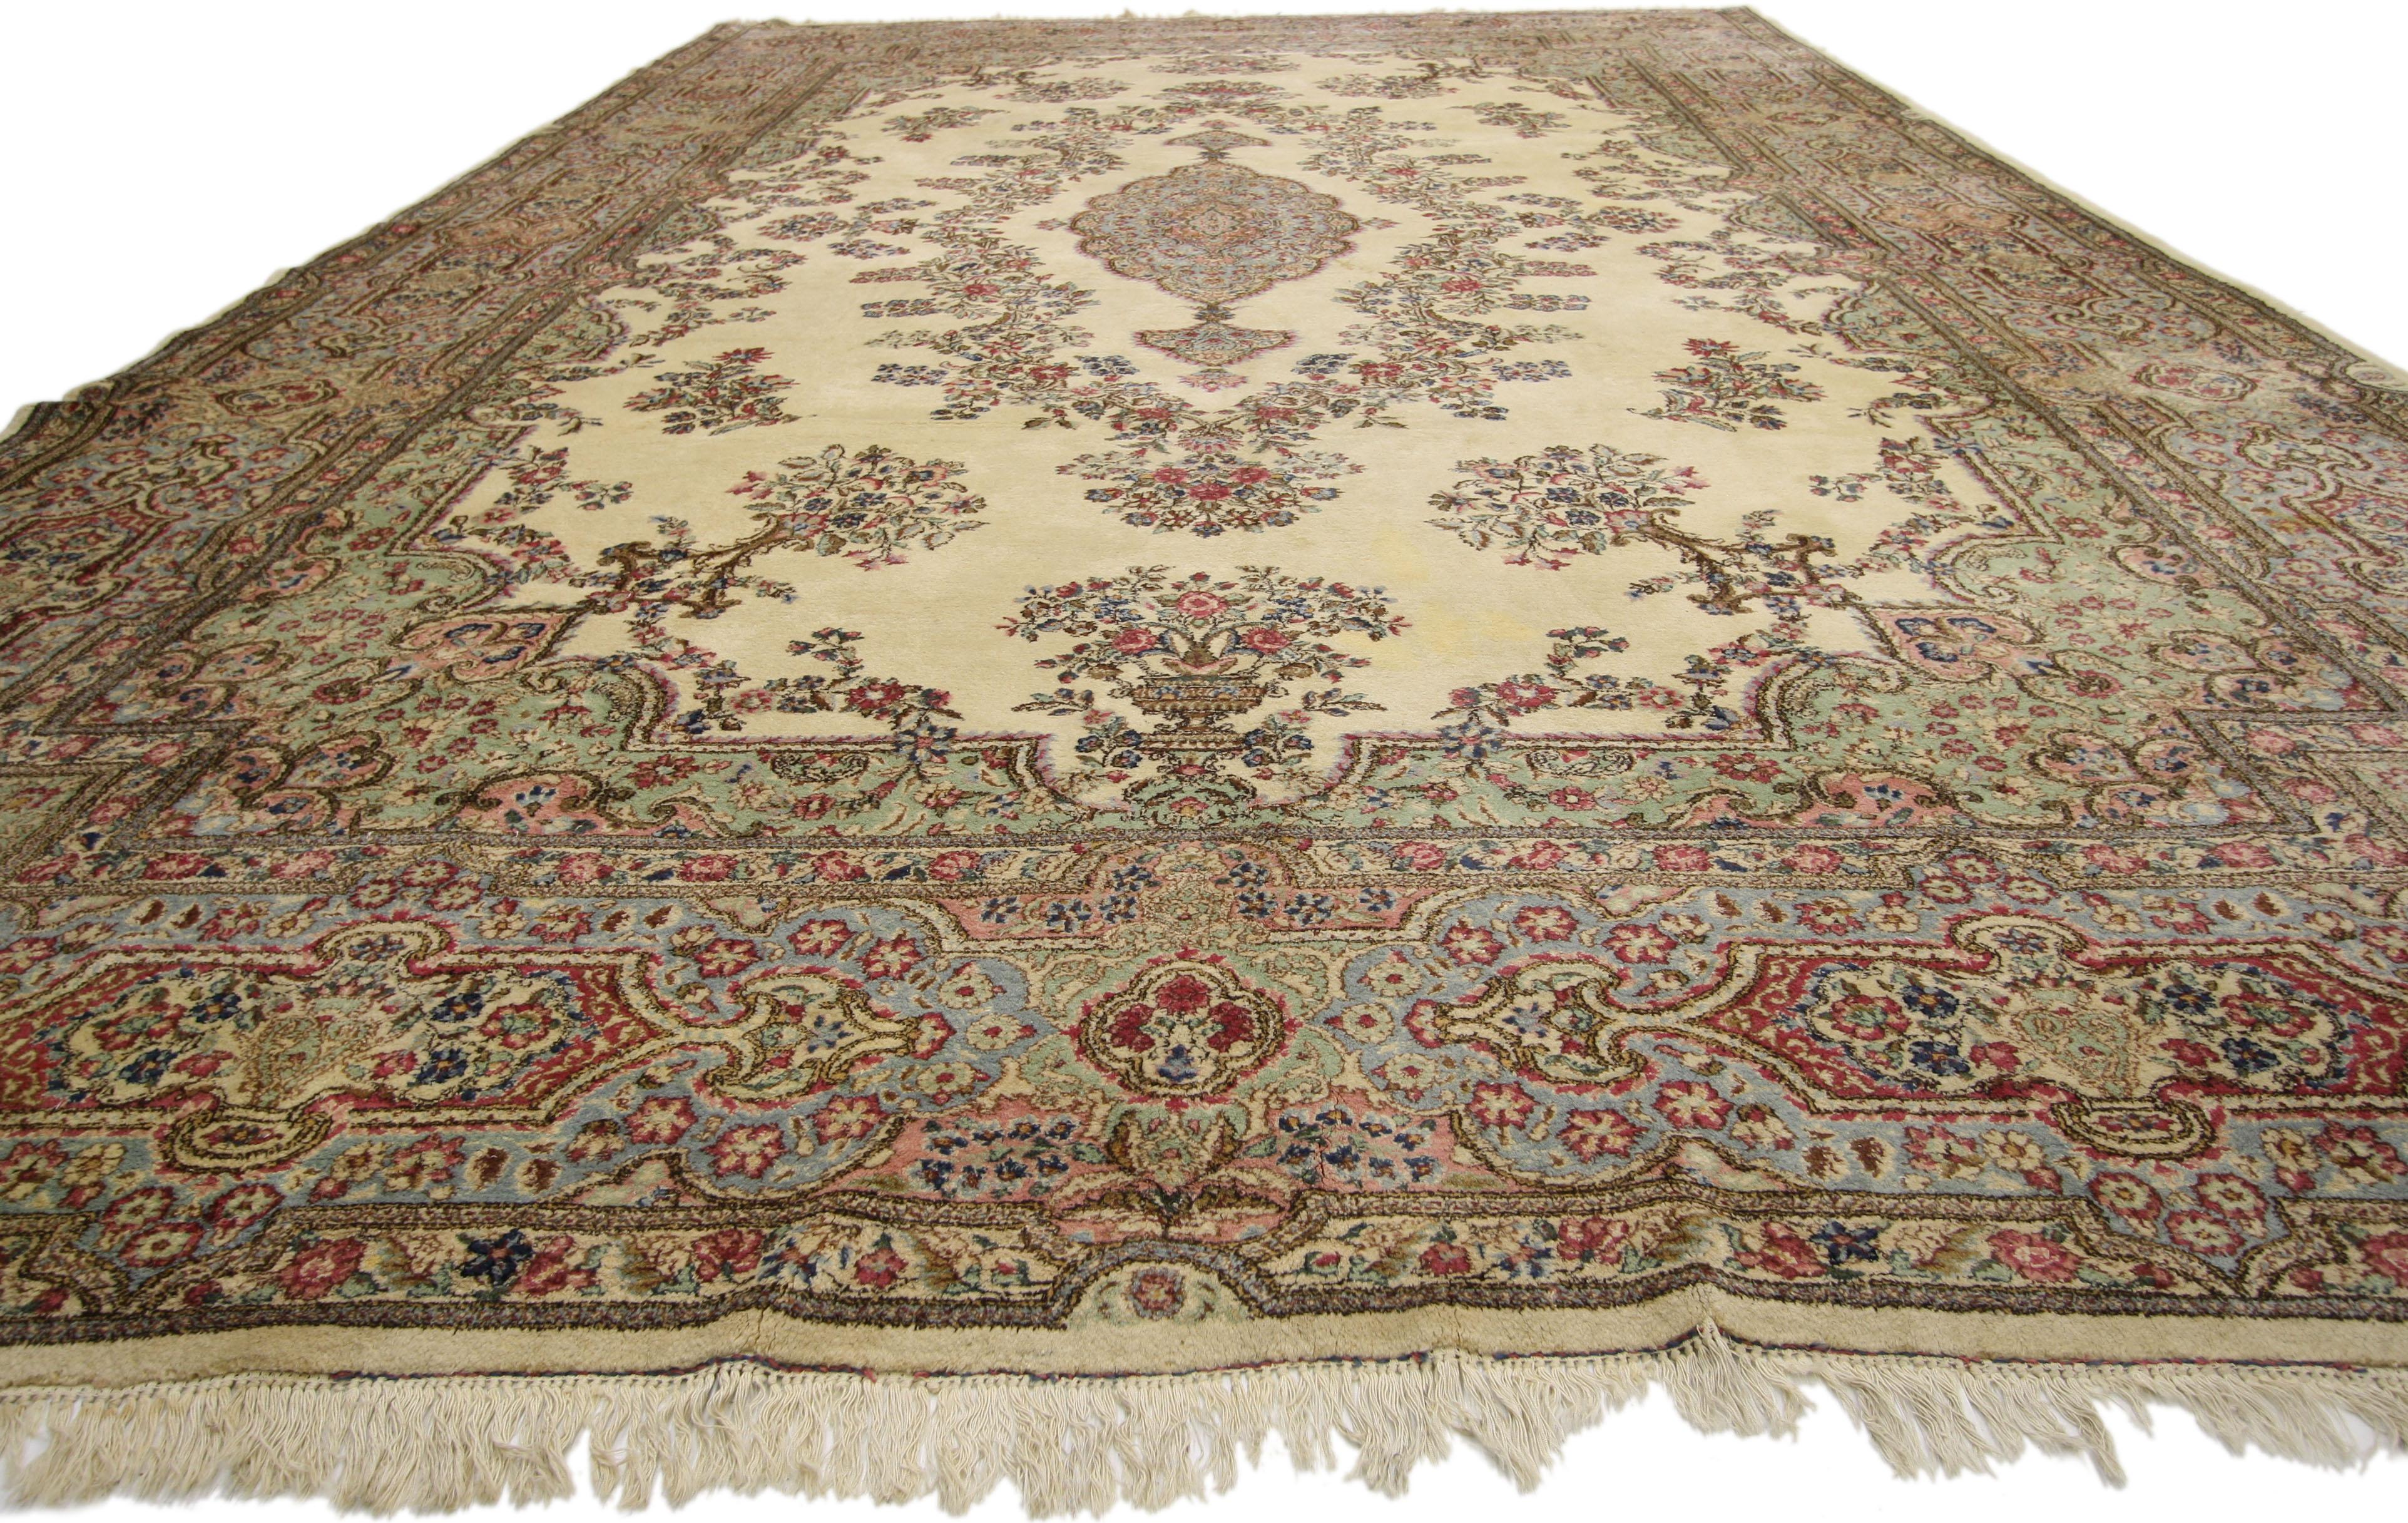 Oversized Antique Persian Kerman Rug with Romantic French Provincial Style In Good Condition For Sale In Dallas, TX